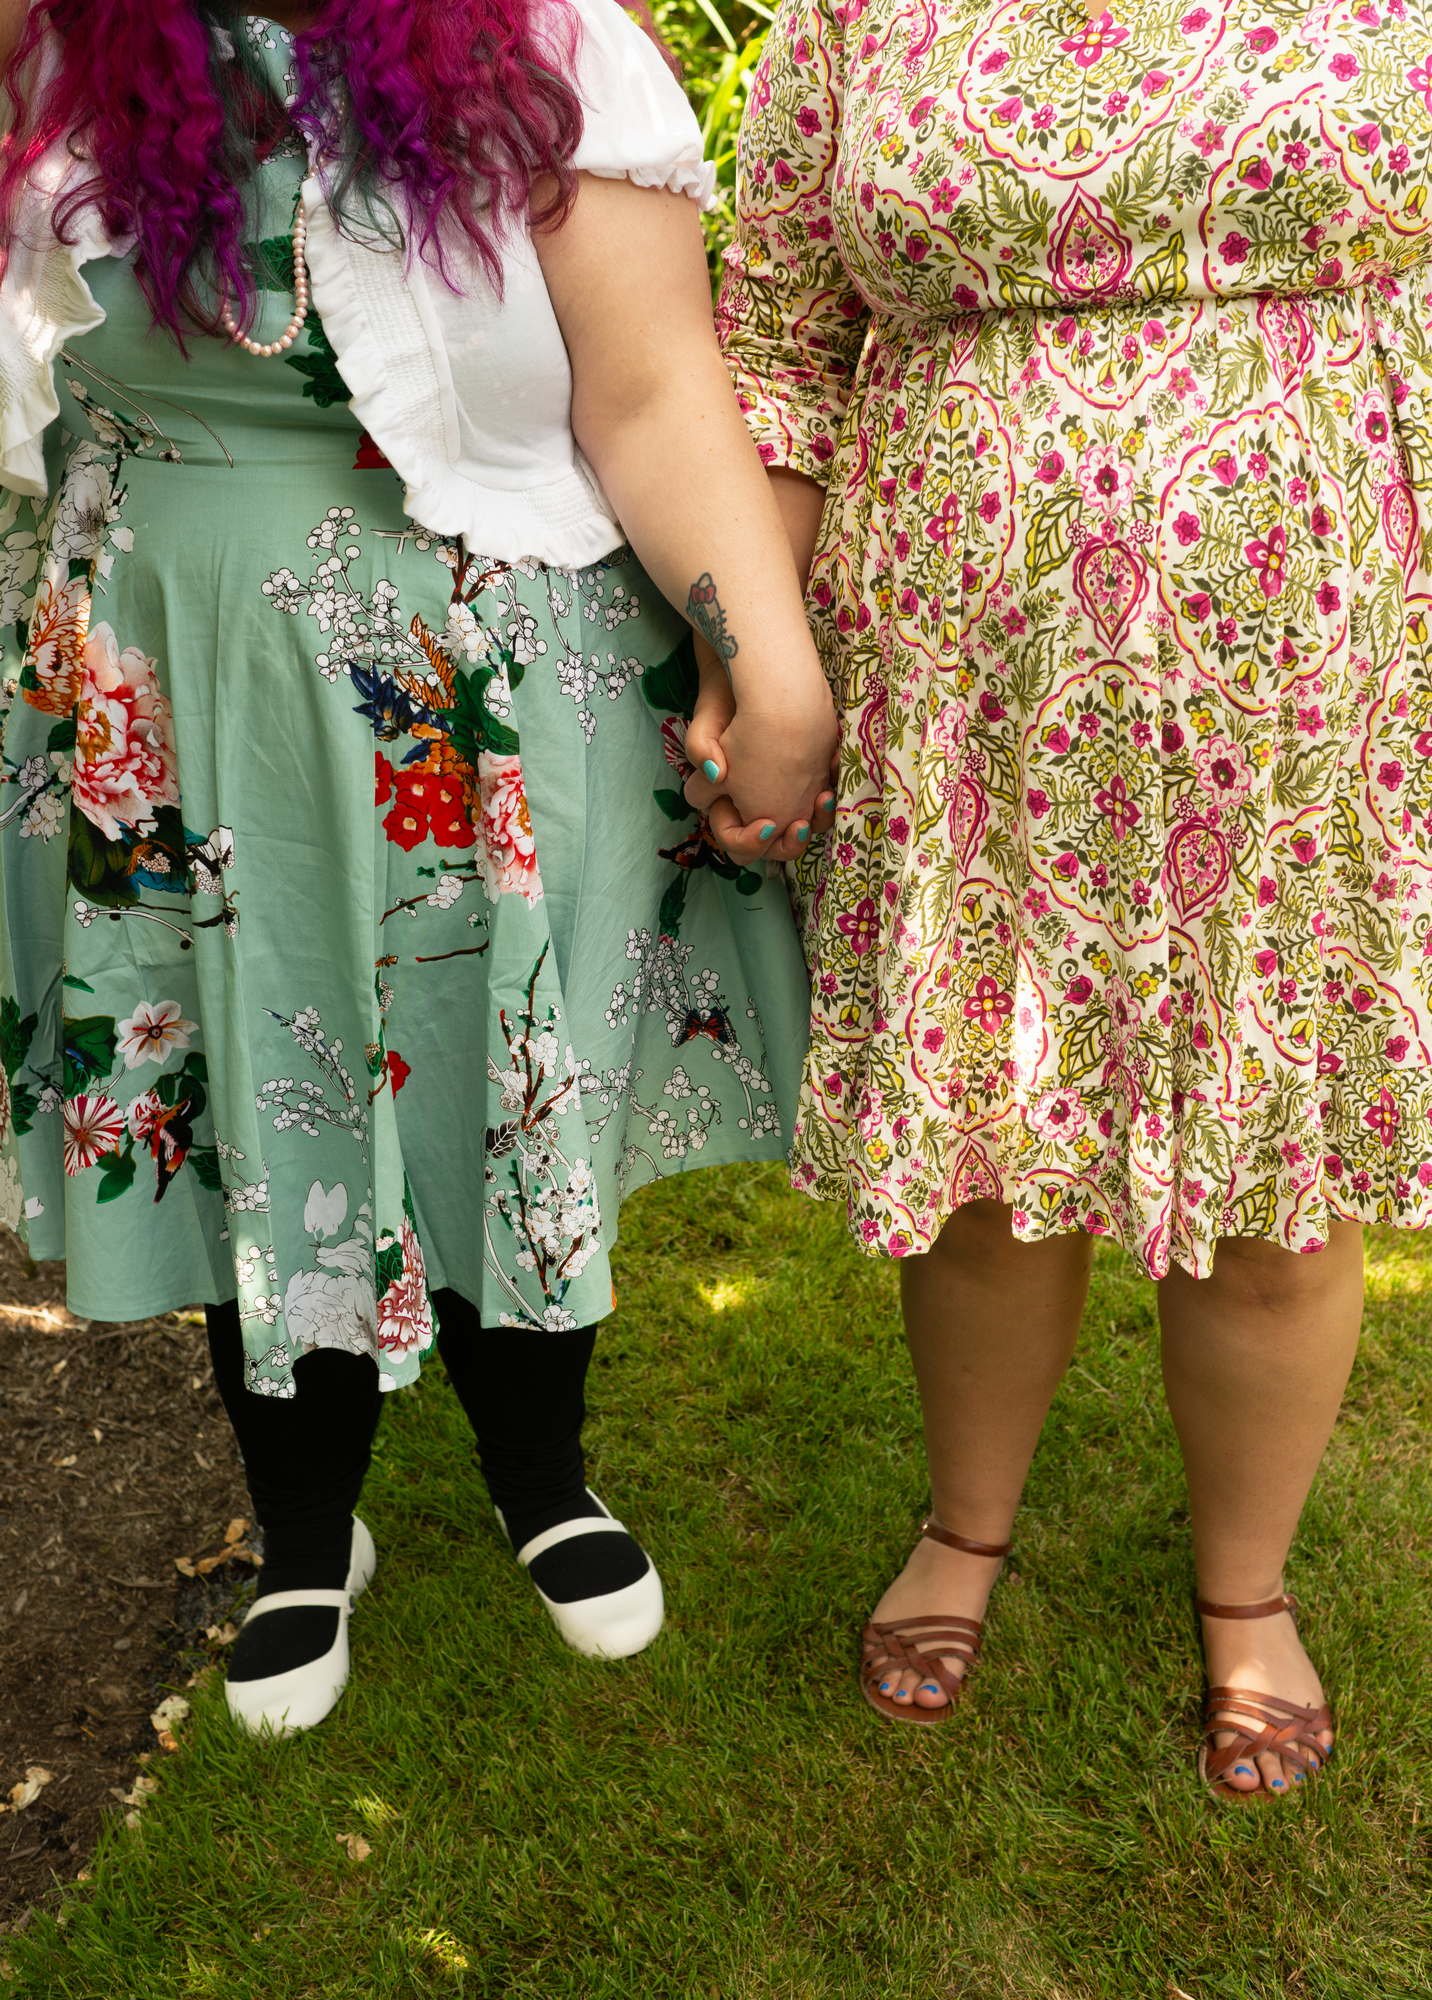 Two fat women wearing dresses hold hands in a lgbt friendly photo shoot